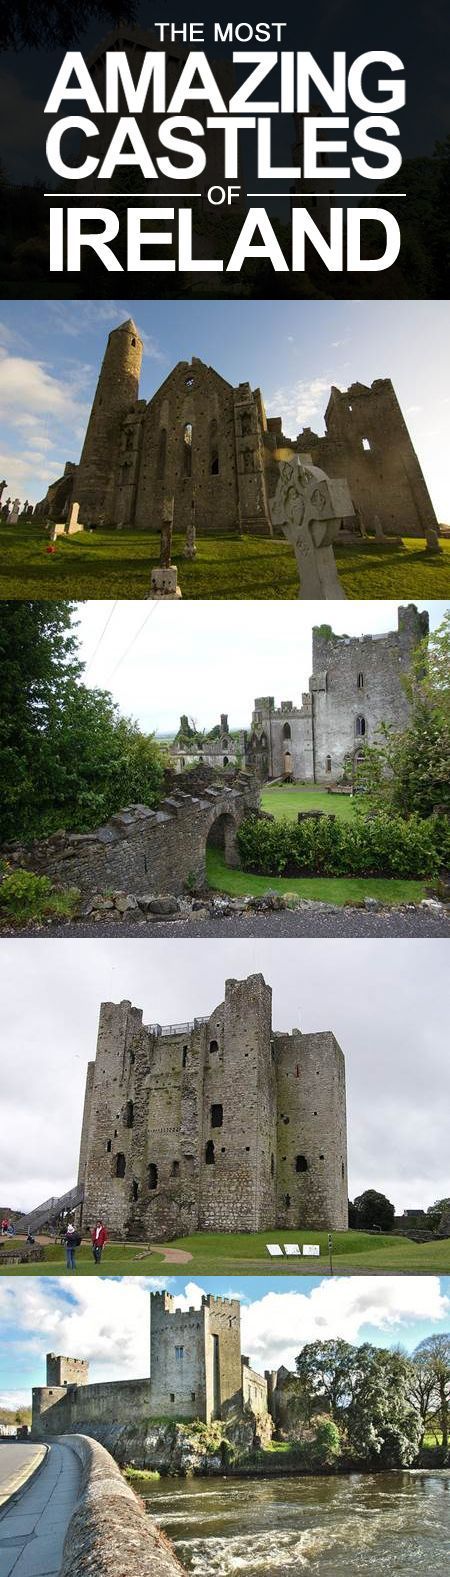 The Most Amazing Castles in Ireland (not to be confused with the boring, run-of-the-mill castles in Ireland).